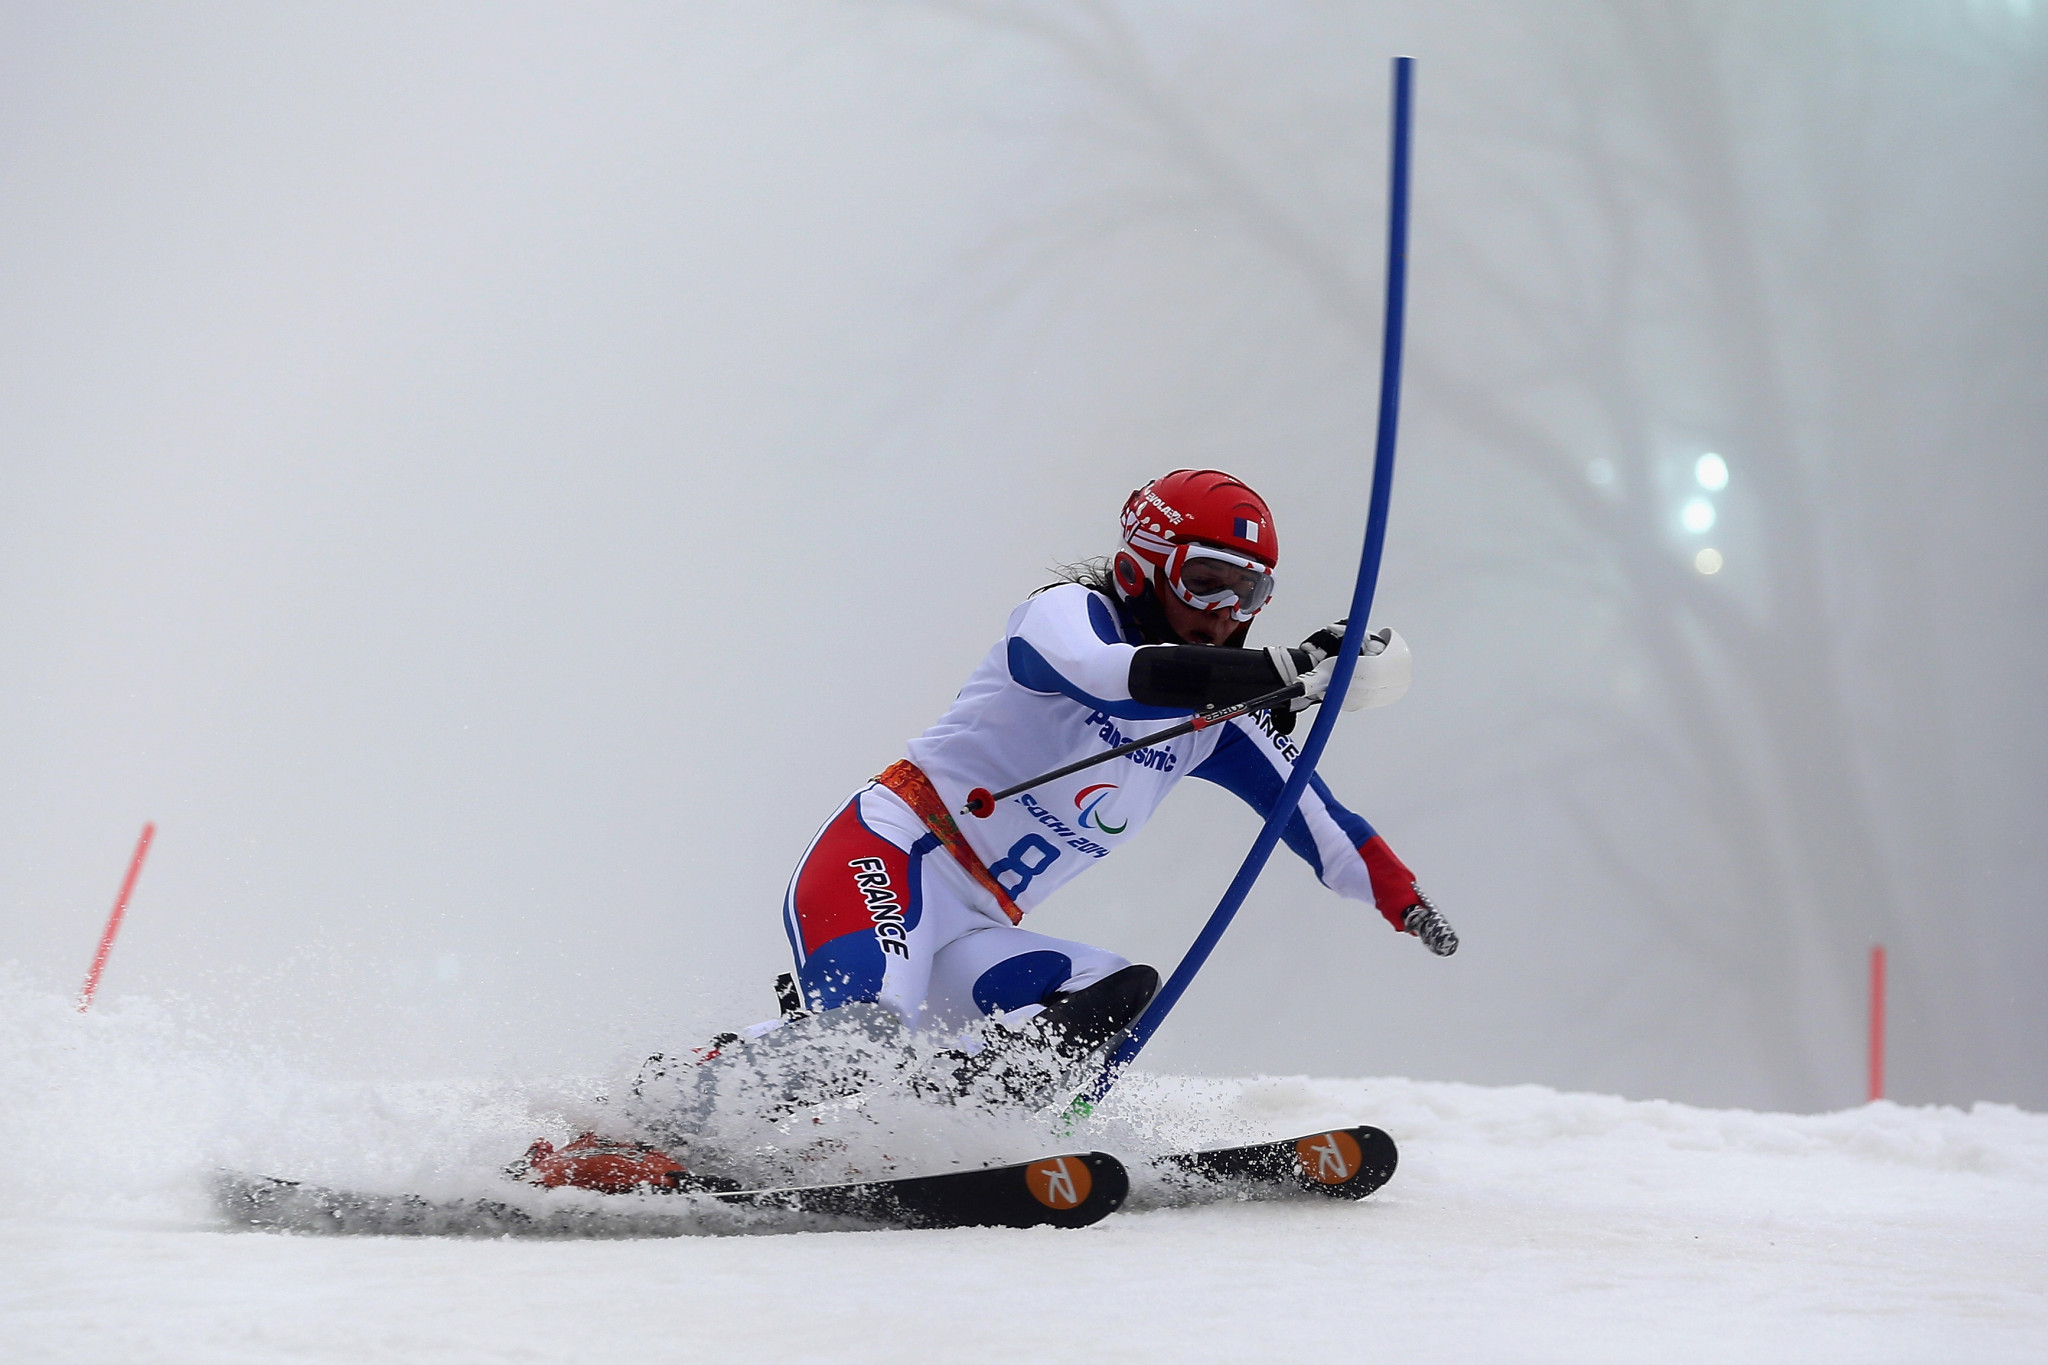 Hosts France claim two gold medals at World Para Alpine Skiing World Cup Finals 